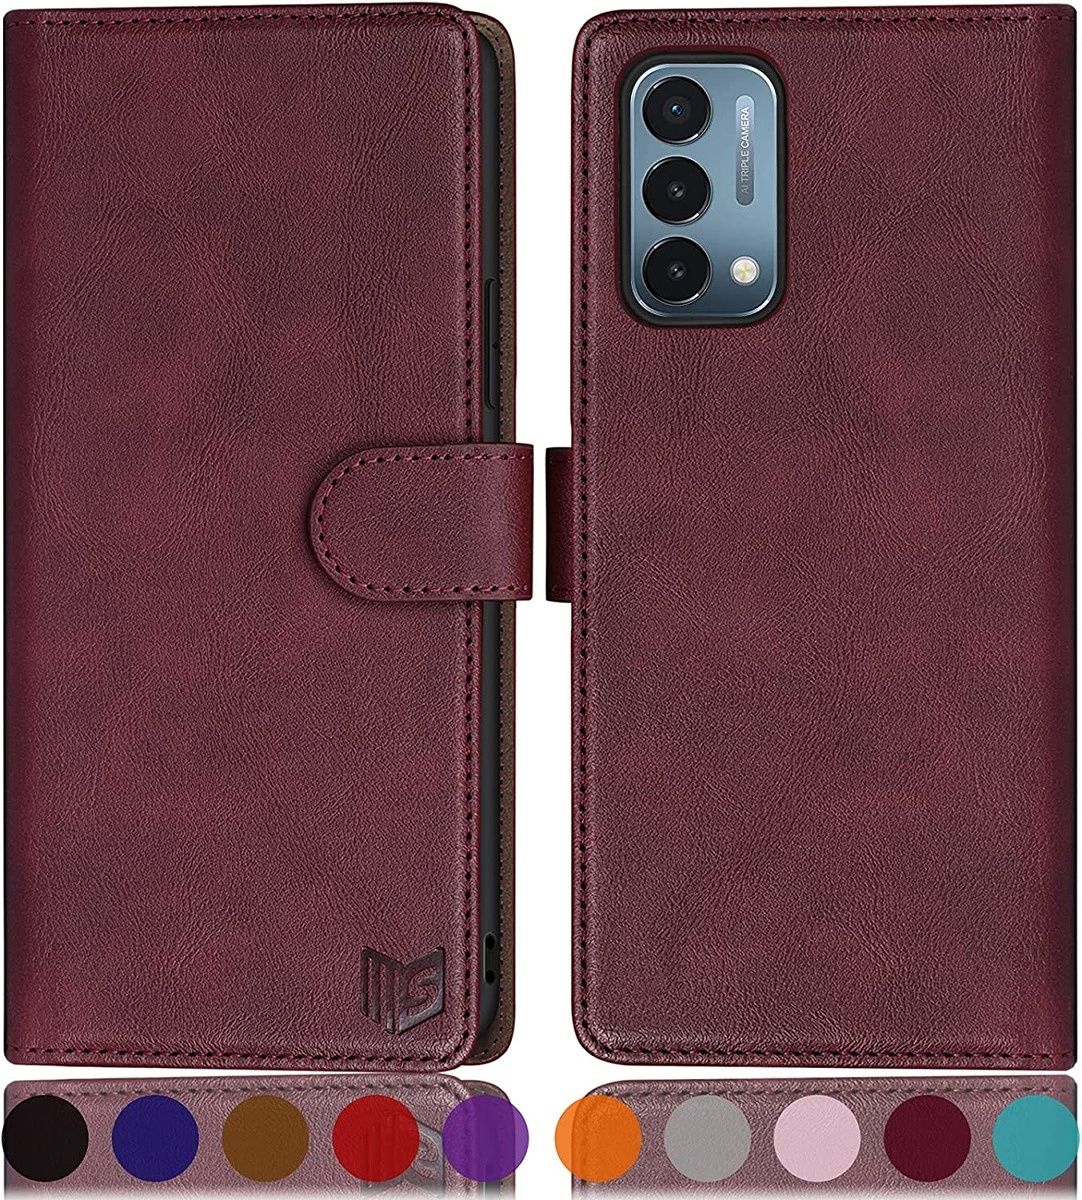 The SUANPOT flip folio case for the OnePlus Nord N200 is made out of high-quality PU leather and offers three card slots so you can easily store your credit cards and ID cards. It also has RFID shielding material to keep your cards safe from thiefs. 